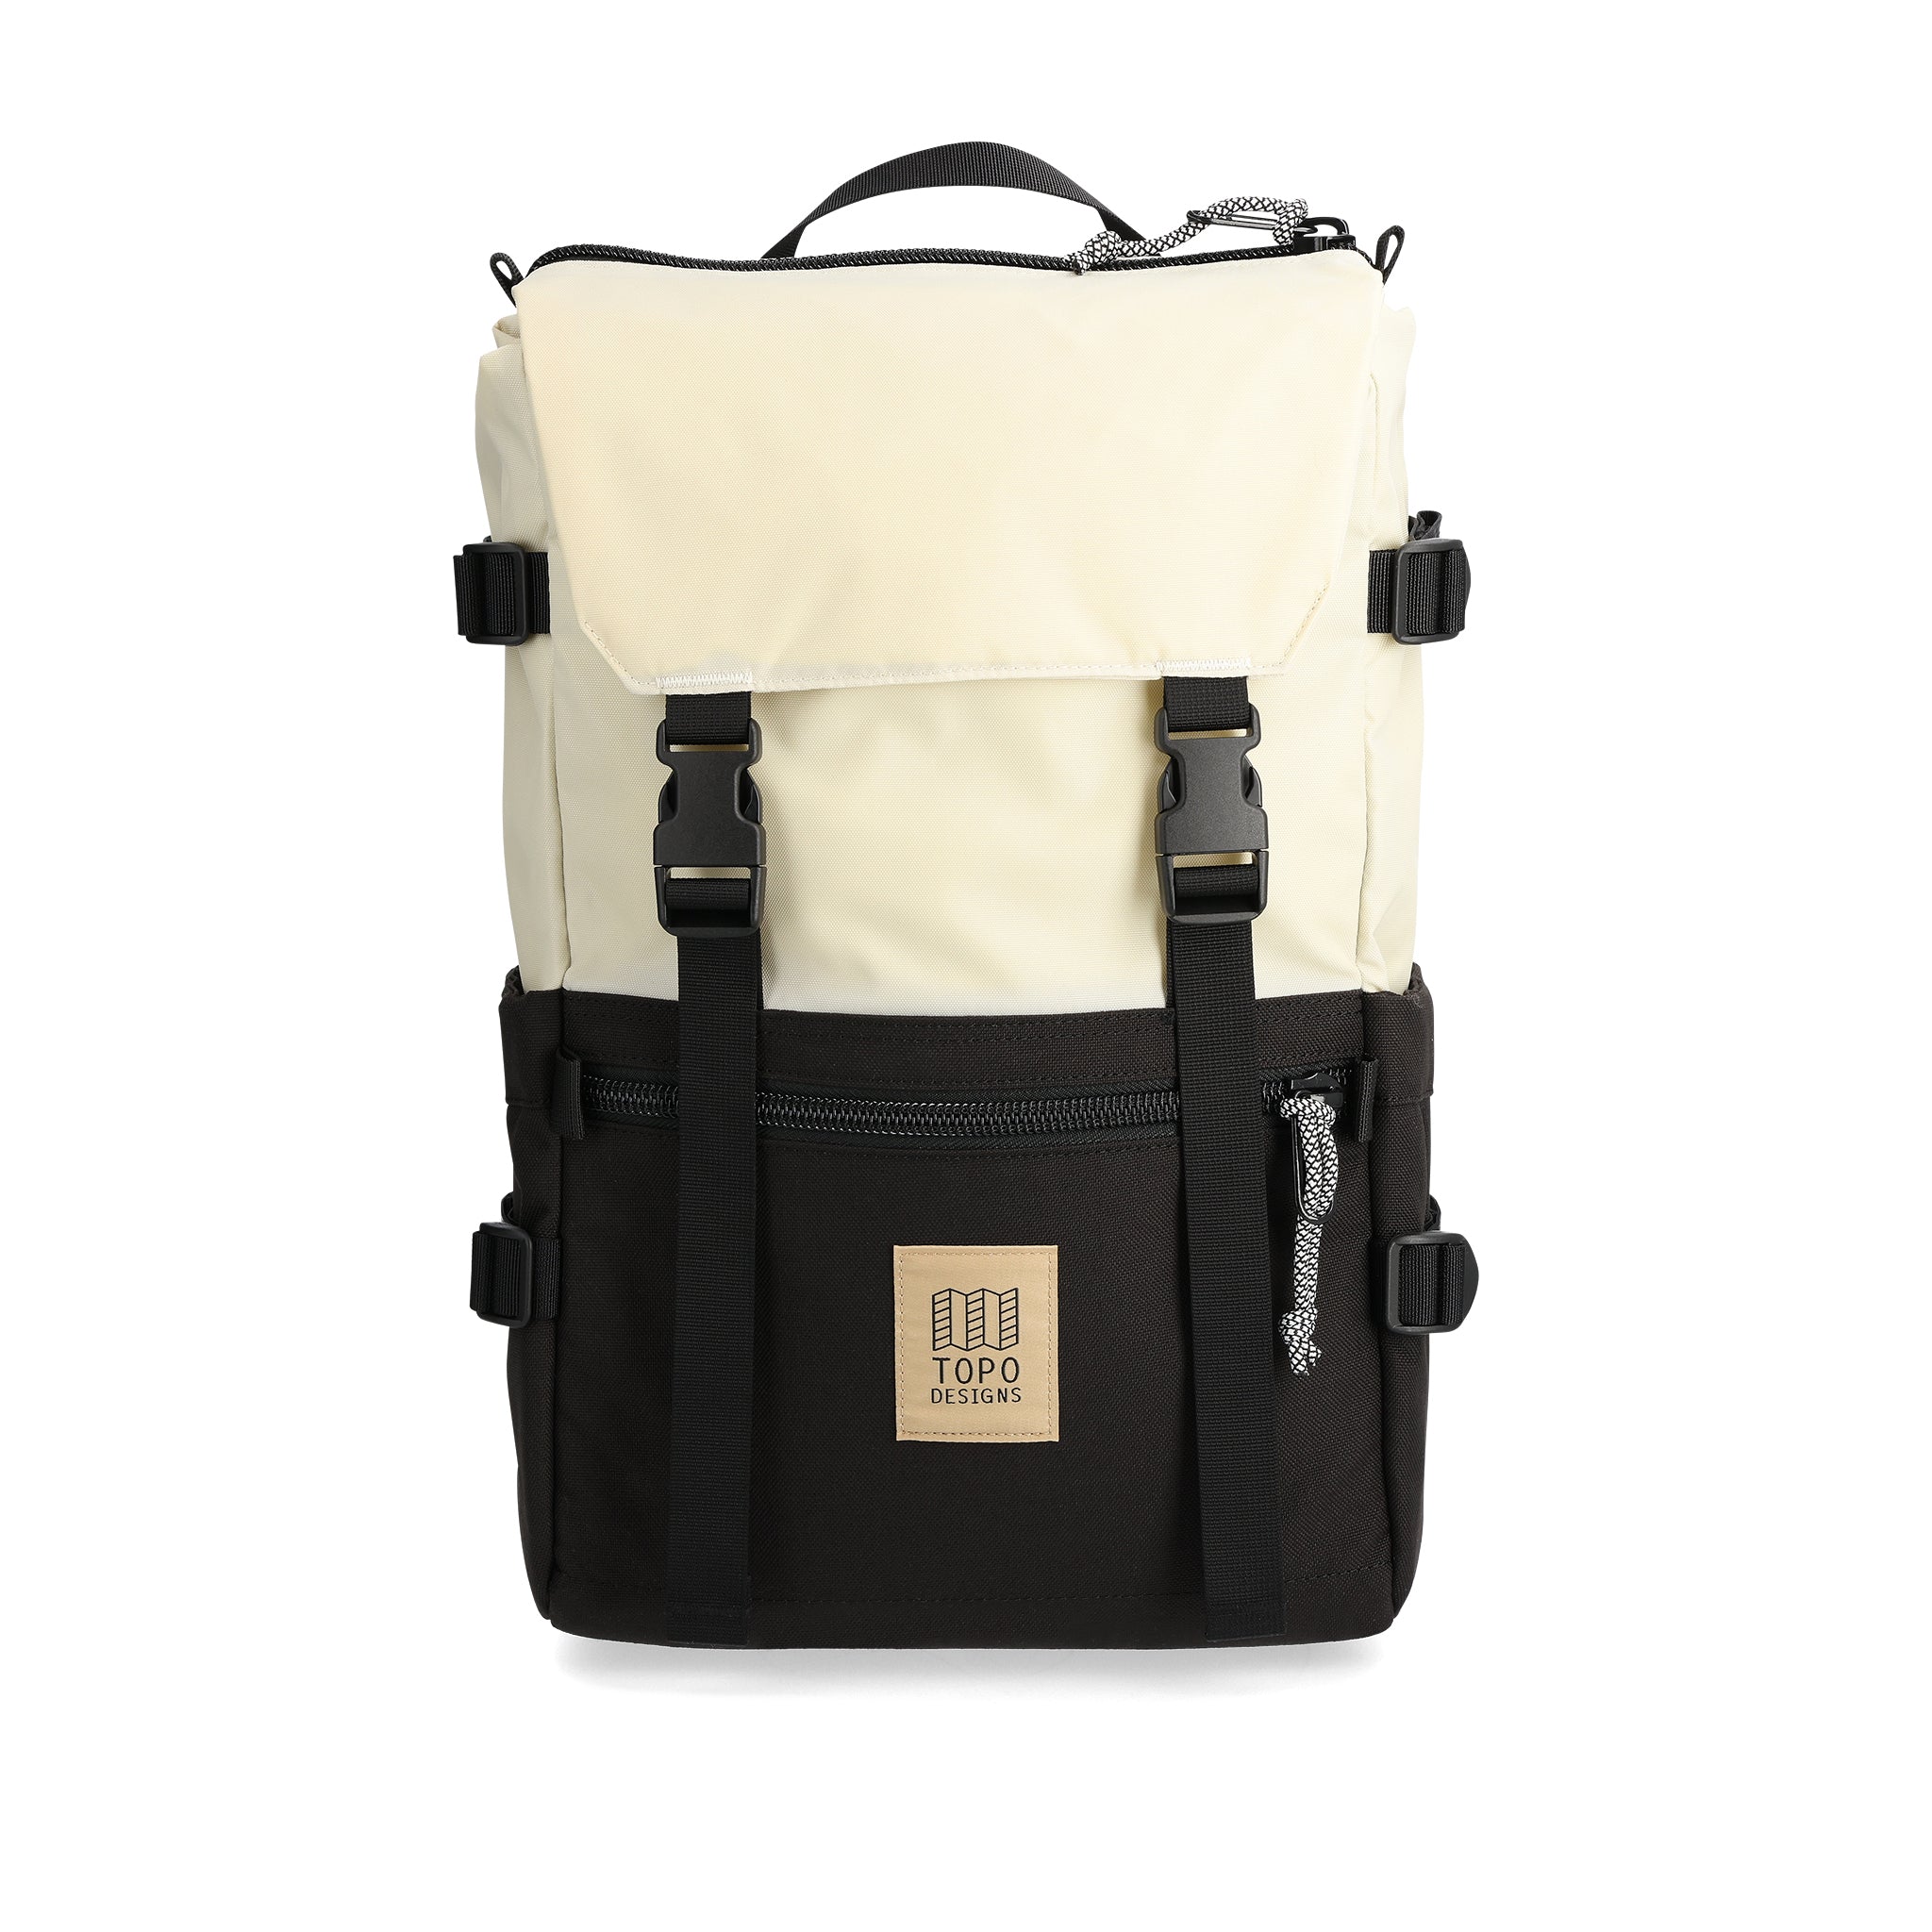 Front View of Topo Designs Rover Pack Classic in "Bone White / Black"